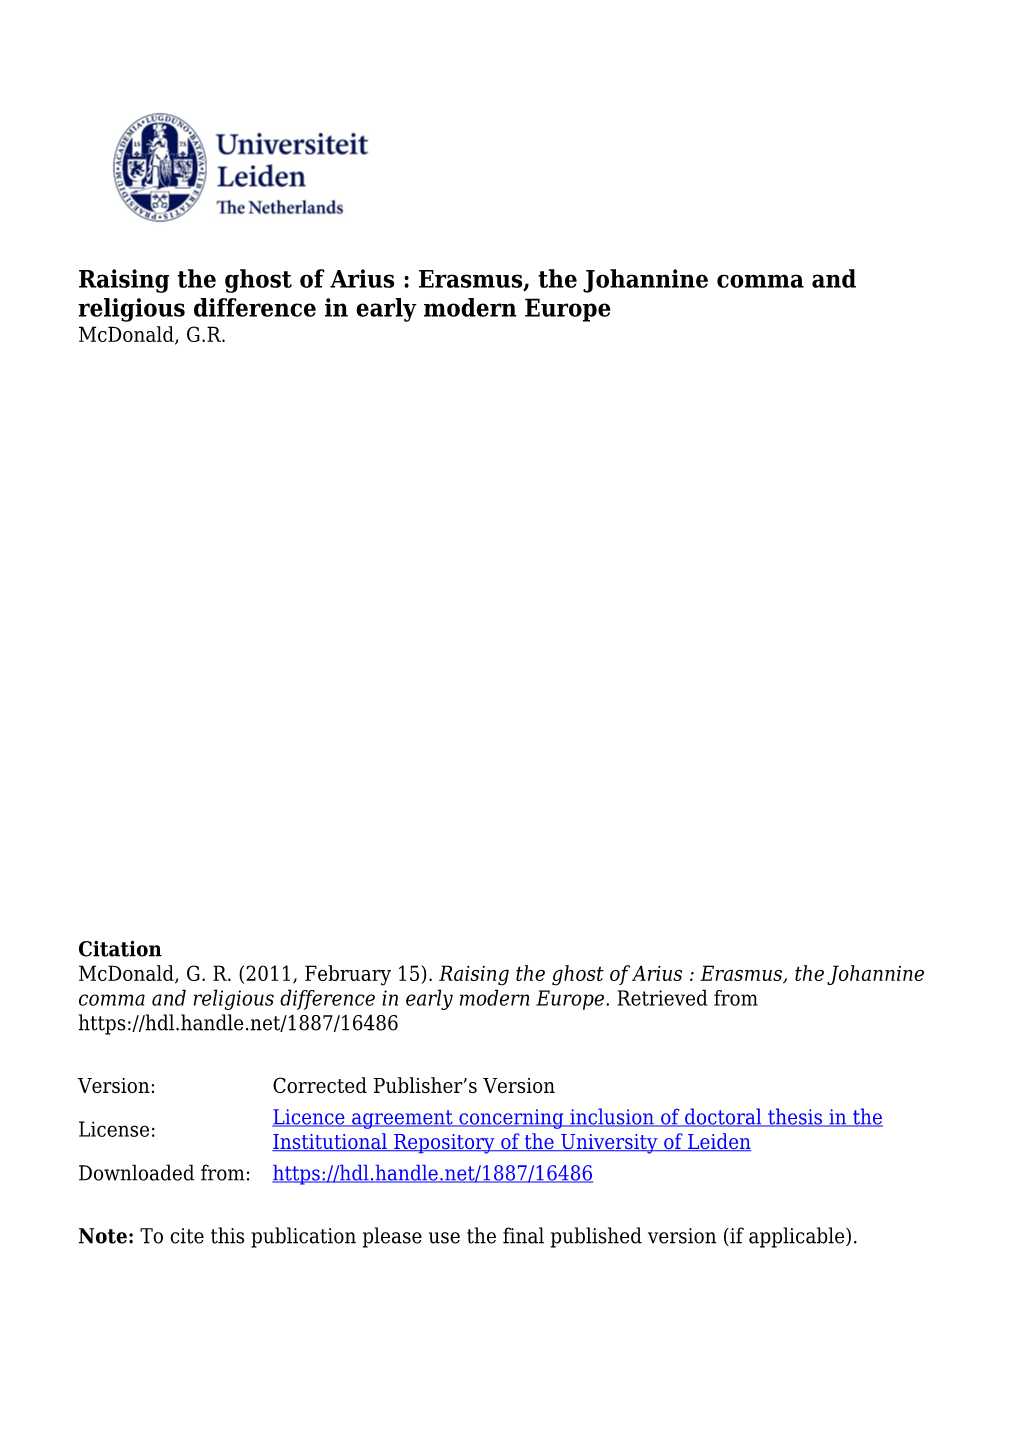 Raising the Ghost of Arius : Erasmus, the Johannine Comma and Religious Difference in Early Modern Europe Mcdonald, G.R